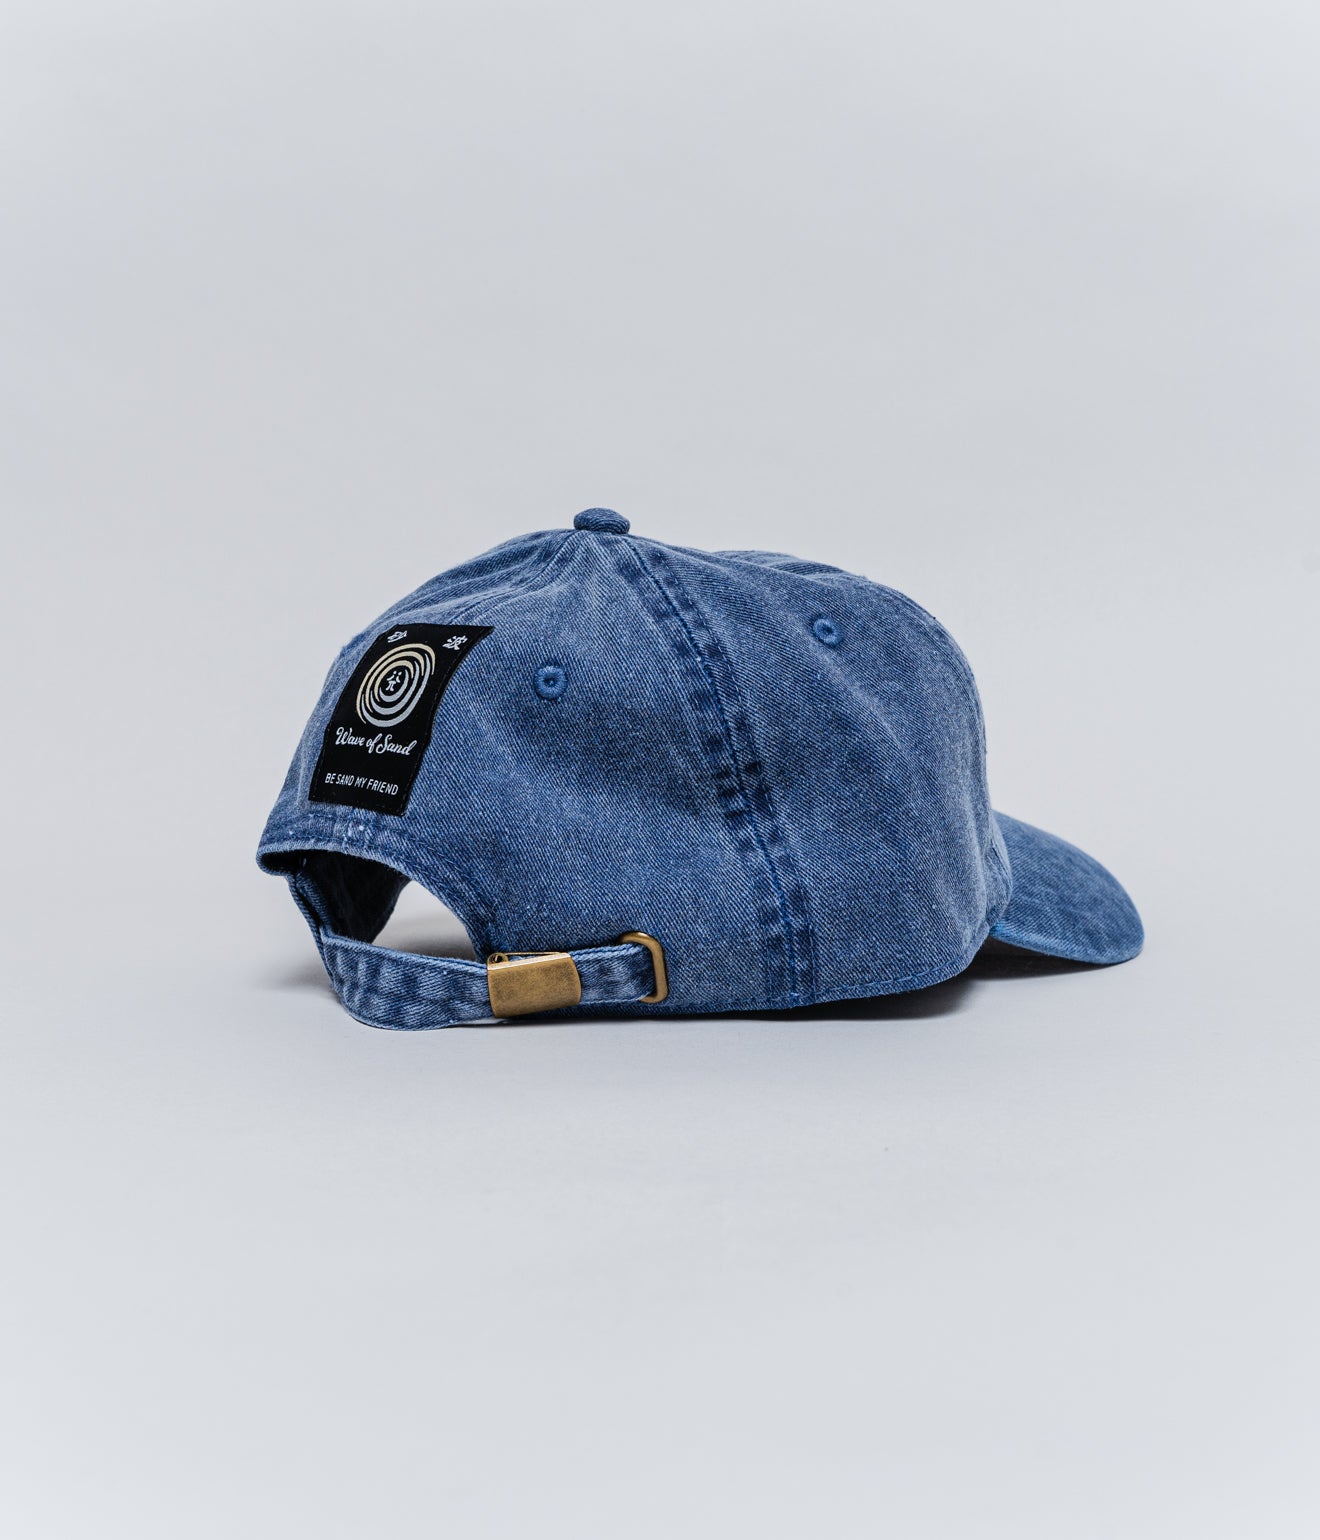 WAVE OF SAND "CAP PIGMENT DYED TWILL" NAVY - WEAREALLANIMALS